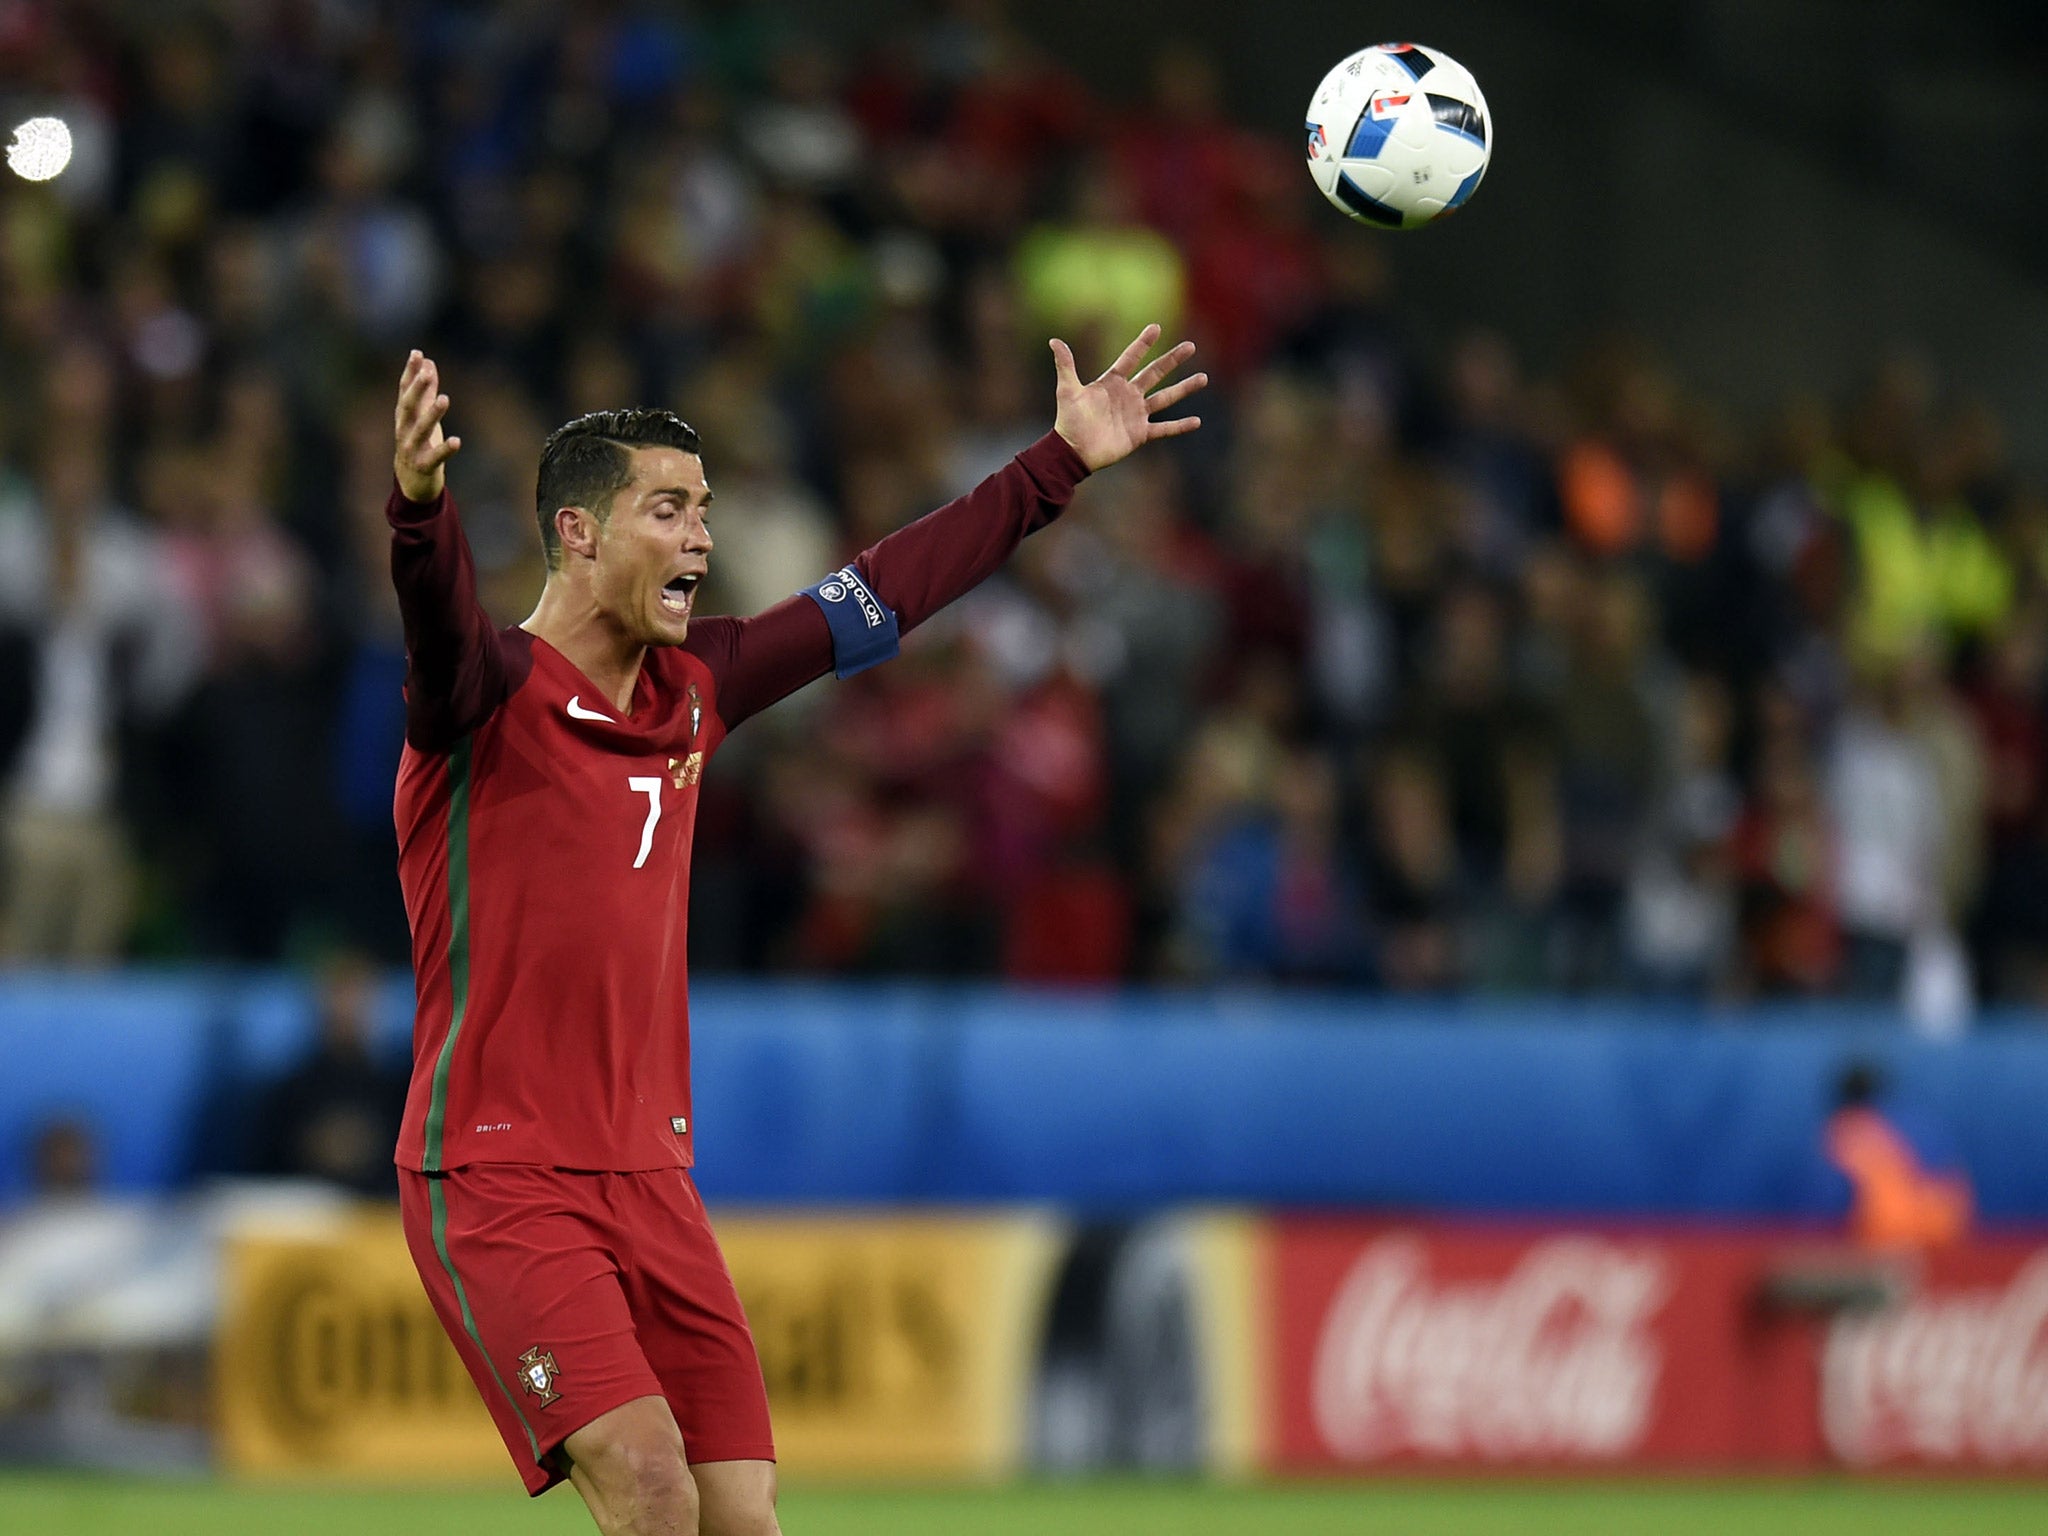 Cristiano Ronaldo has been criticised for his comments after Portugal's 1-1 draw with Iceland